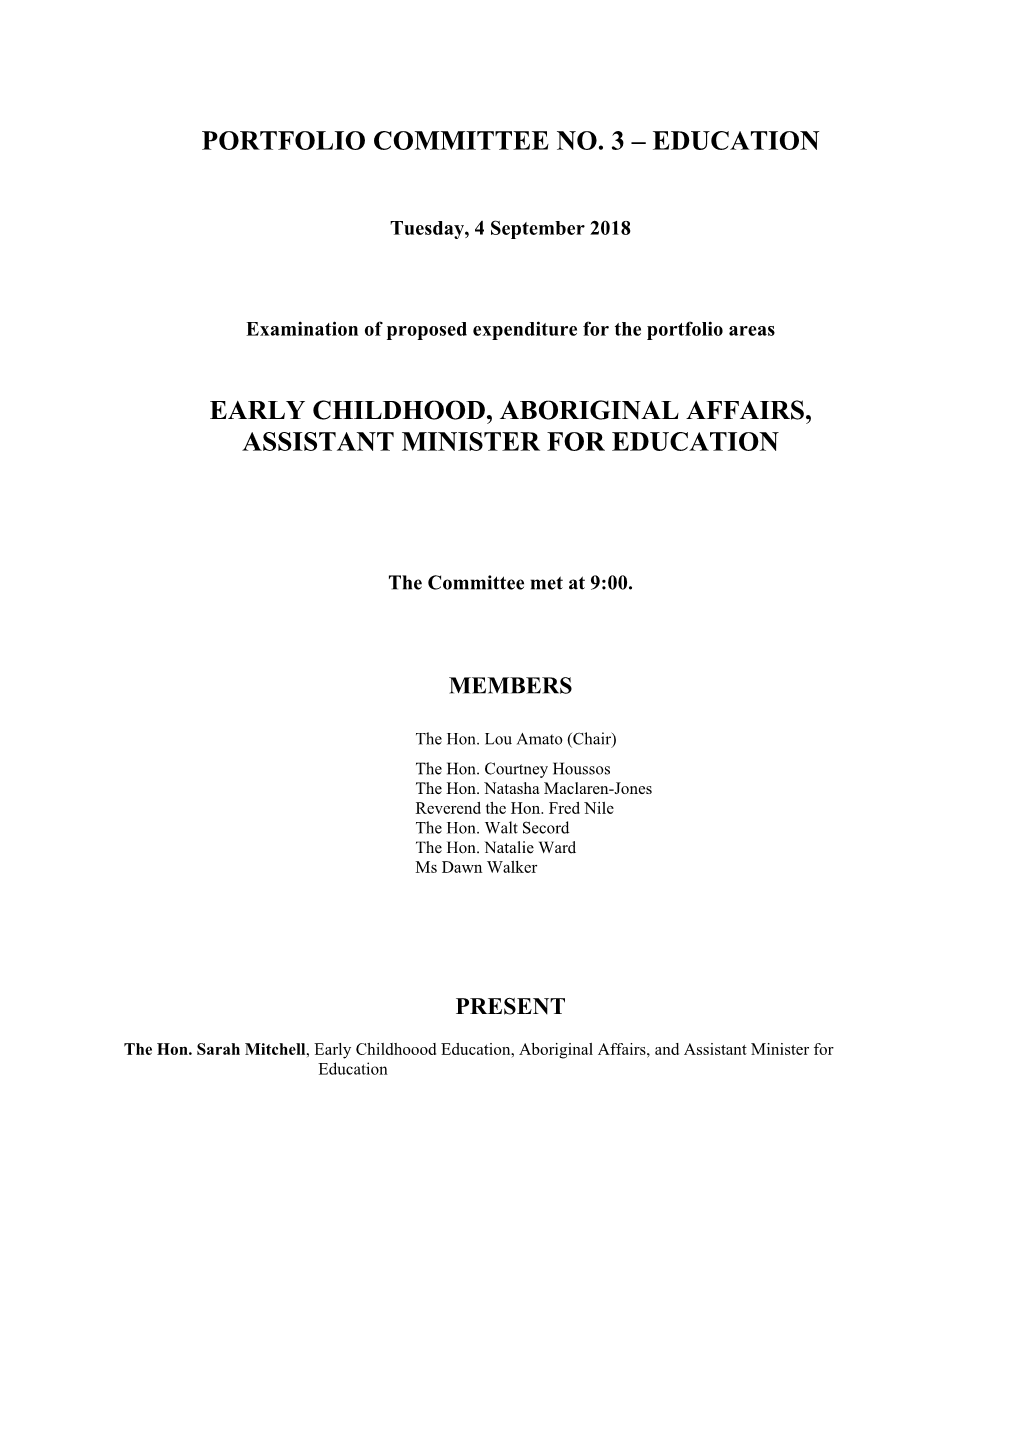 Early Childhood, Aboriginal Affairs, Assistant Minister for Education